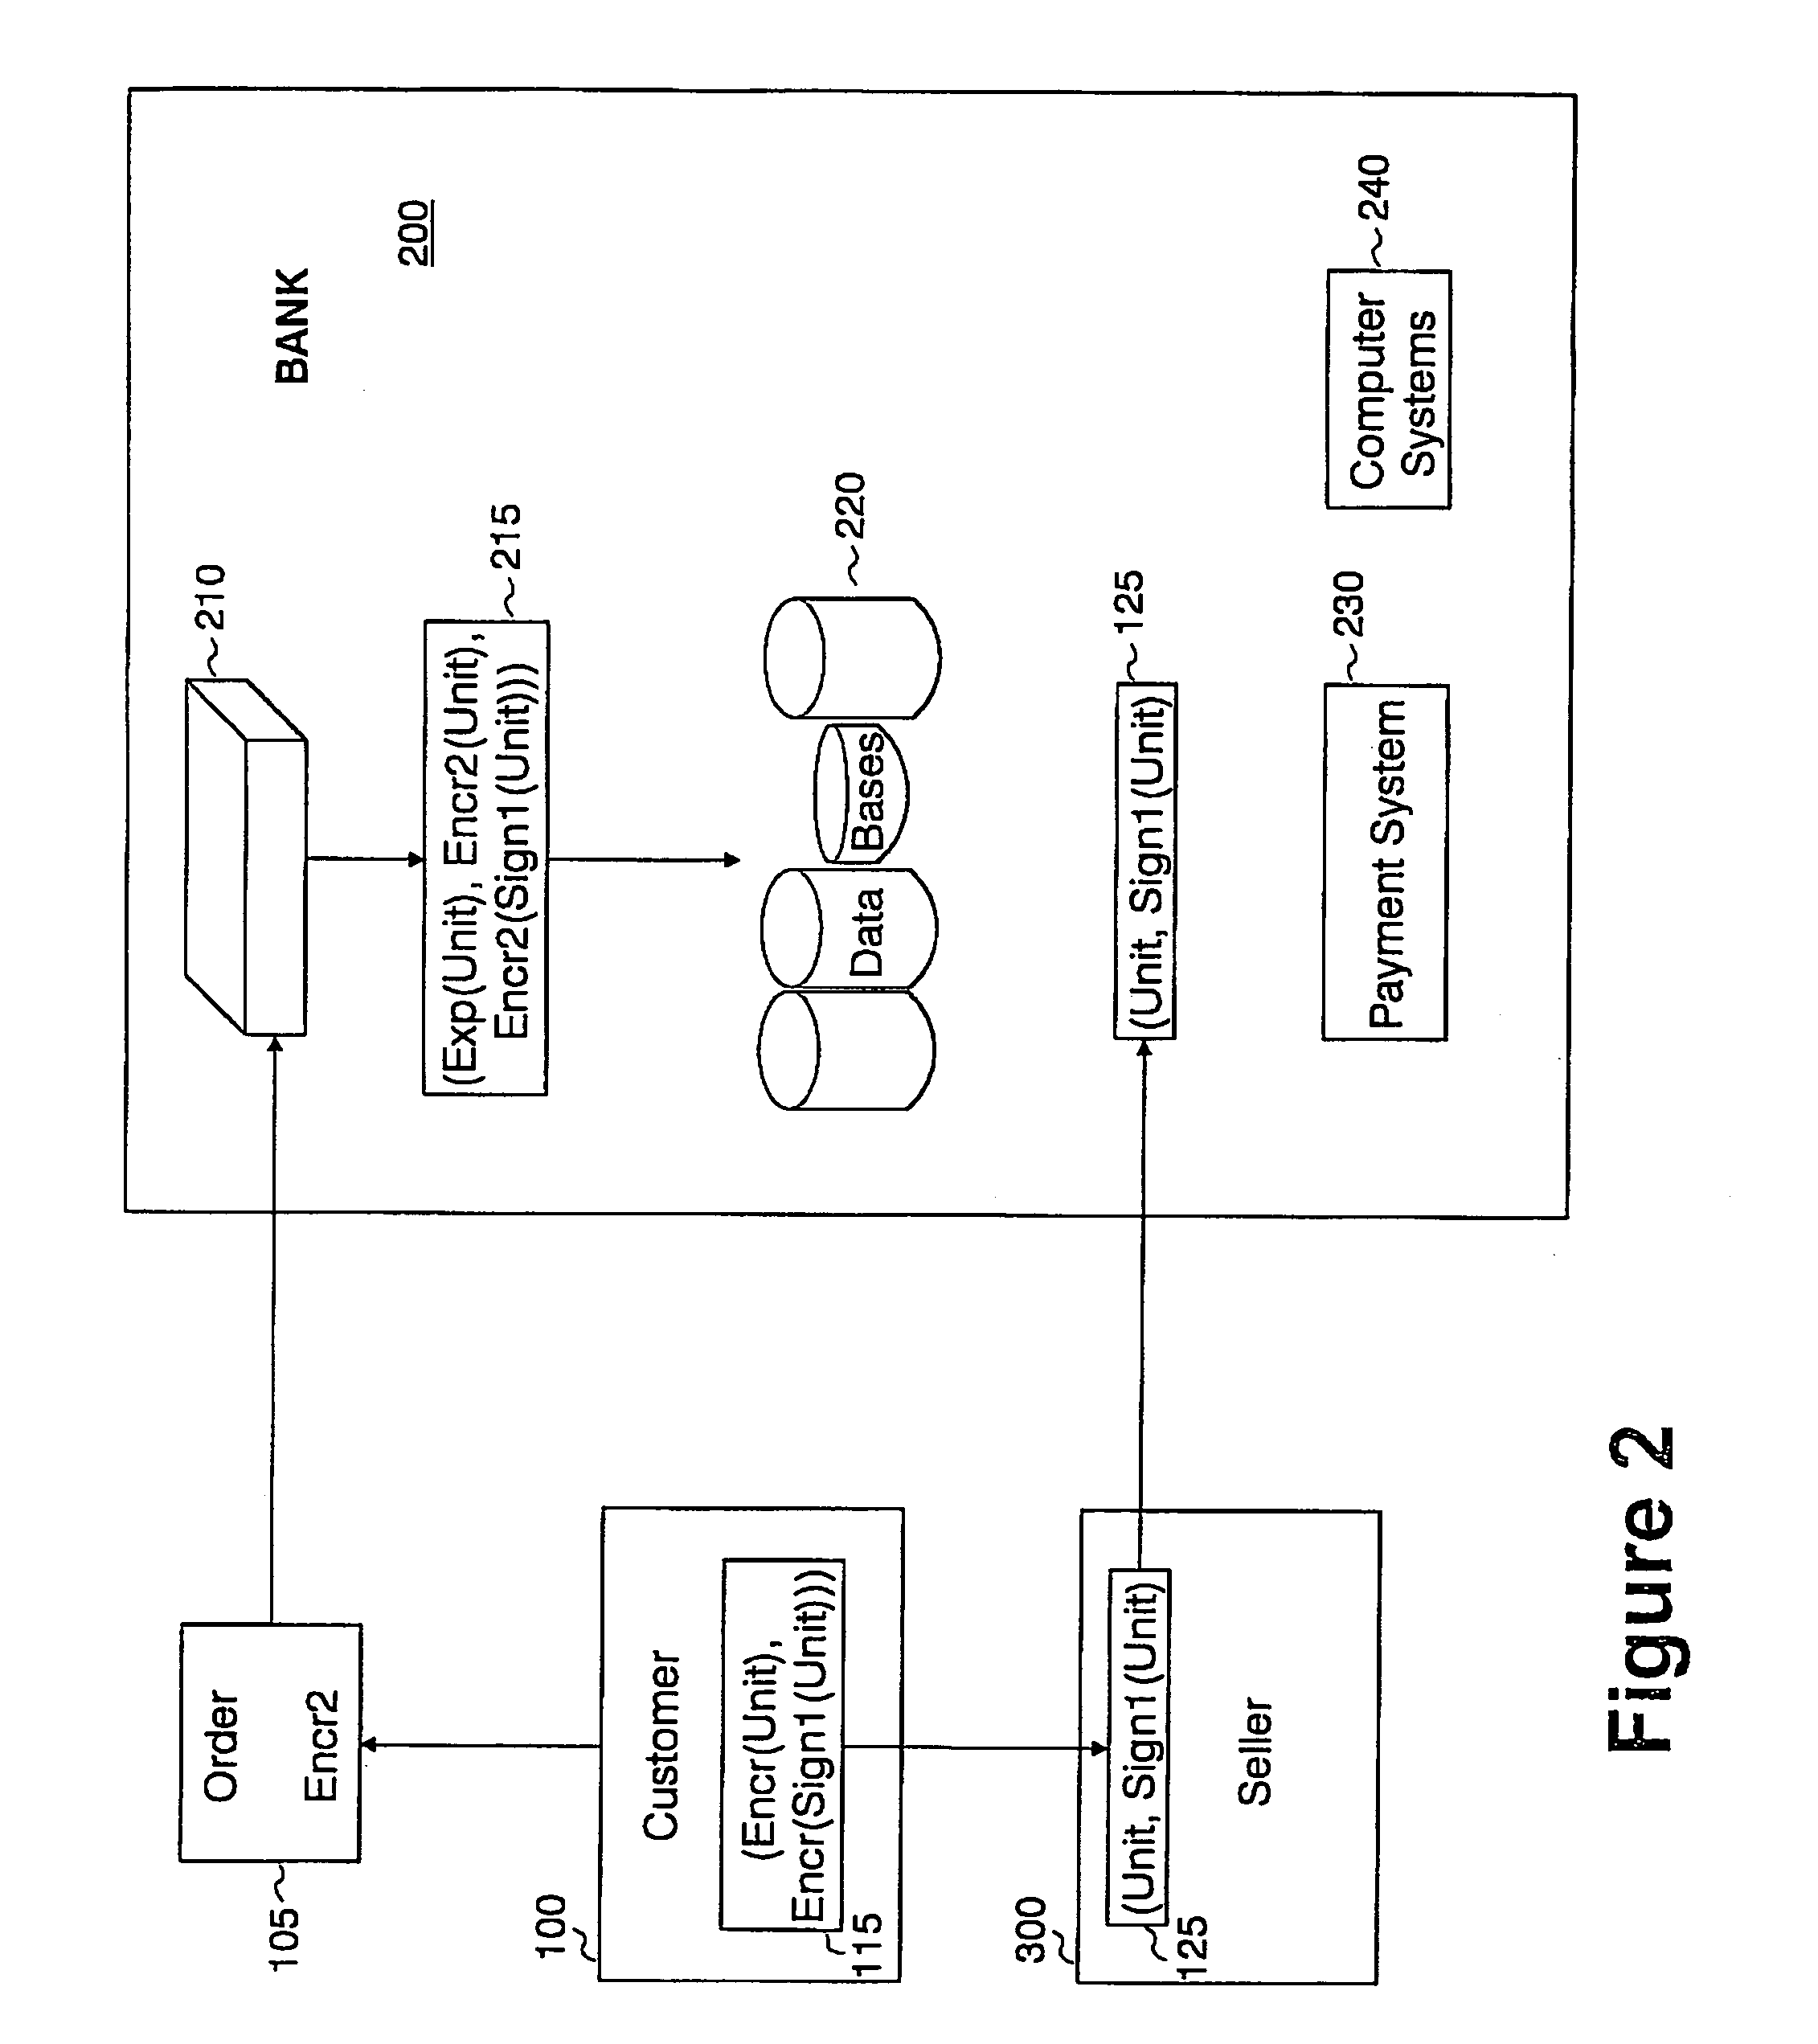 Electronic cash controlled by non-homomorphic signatures